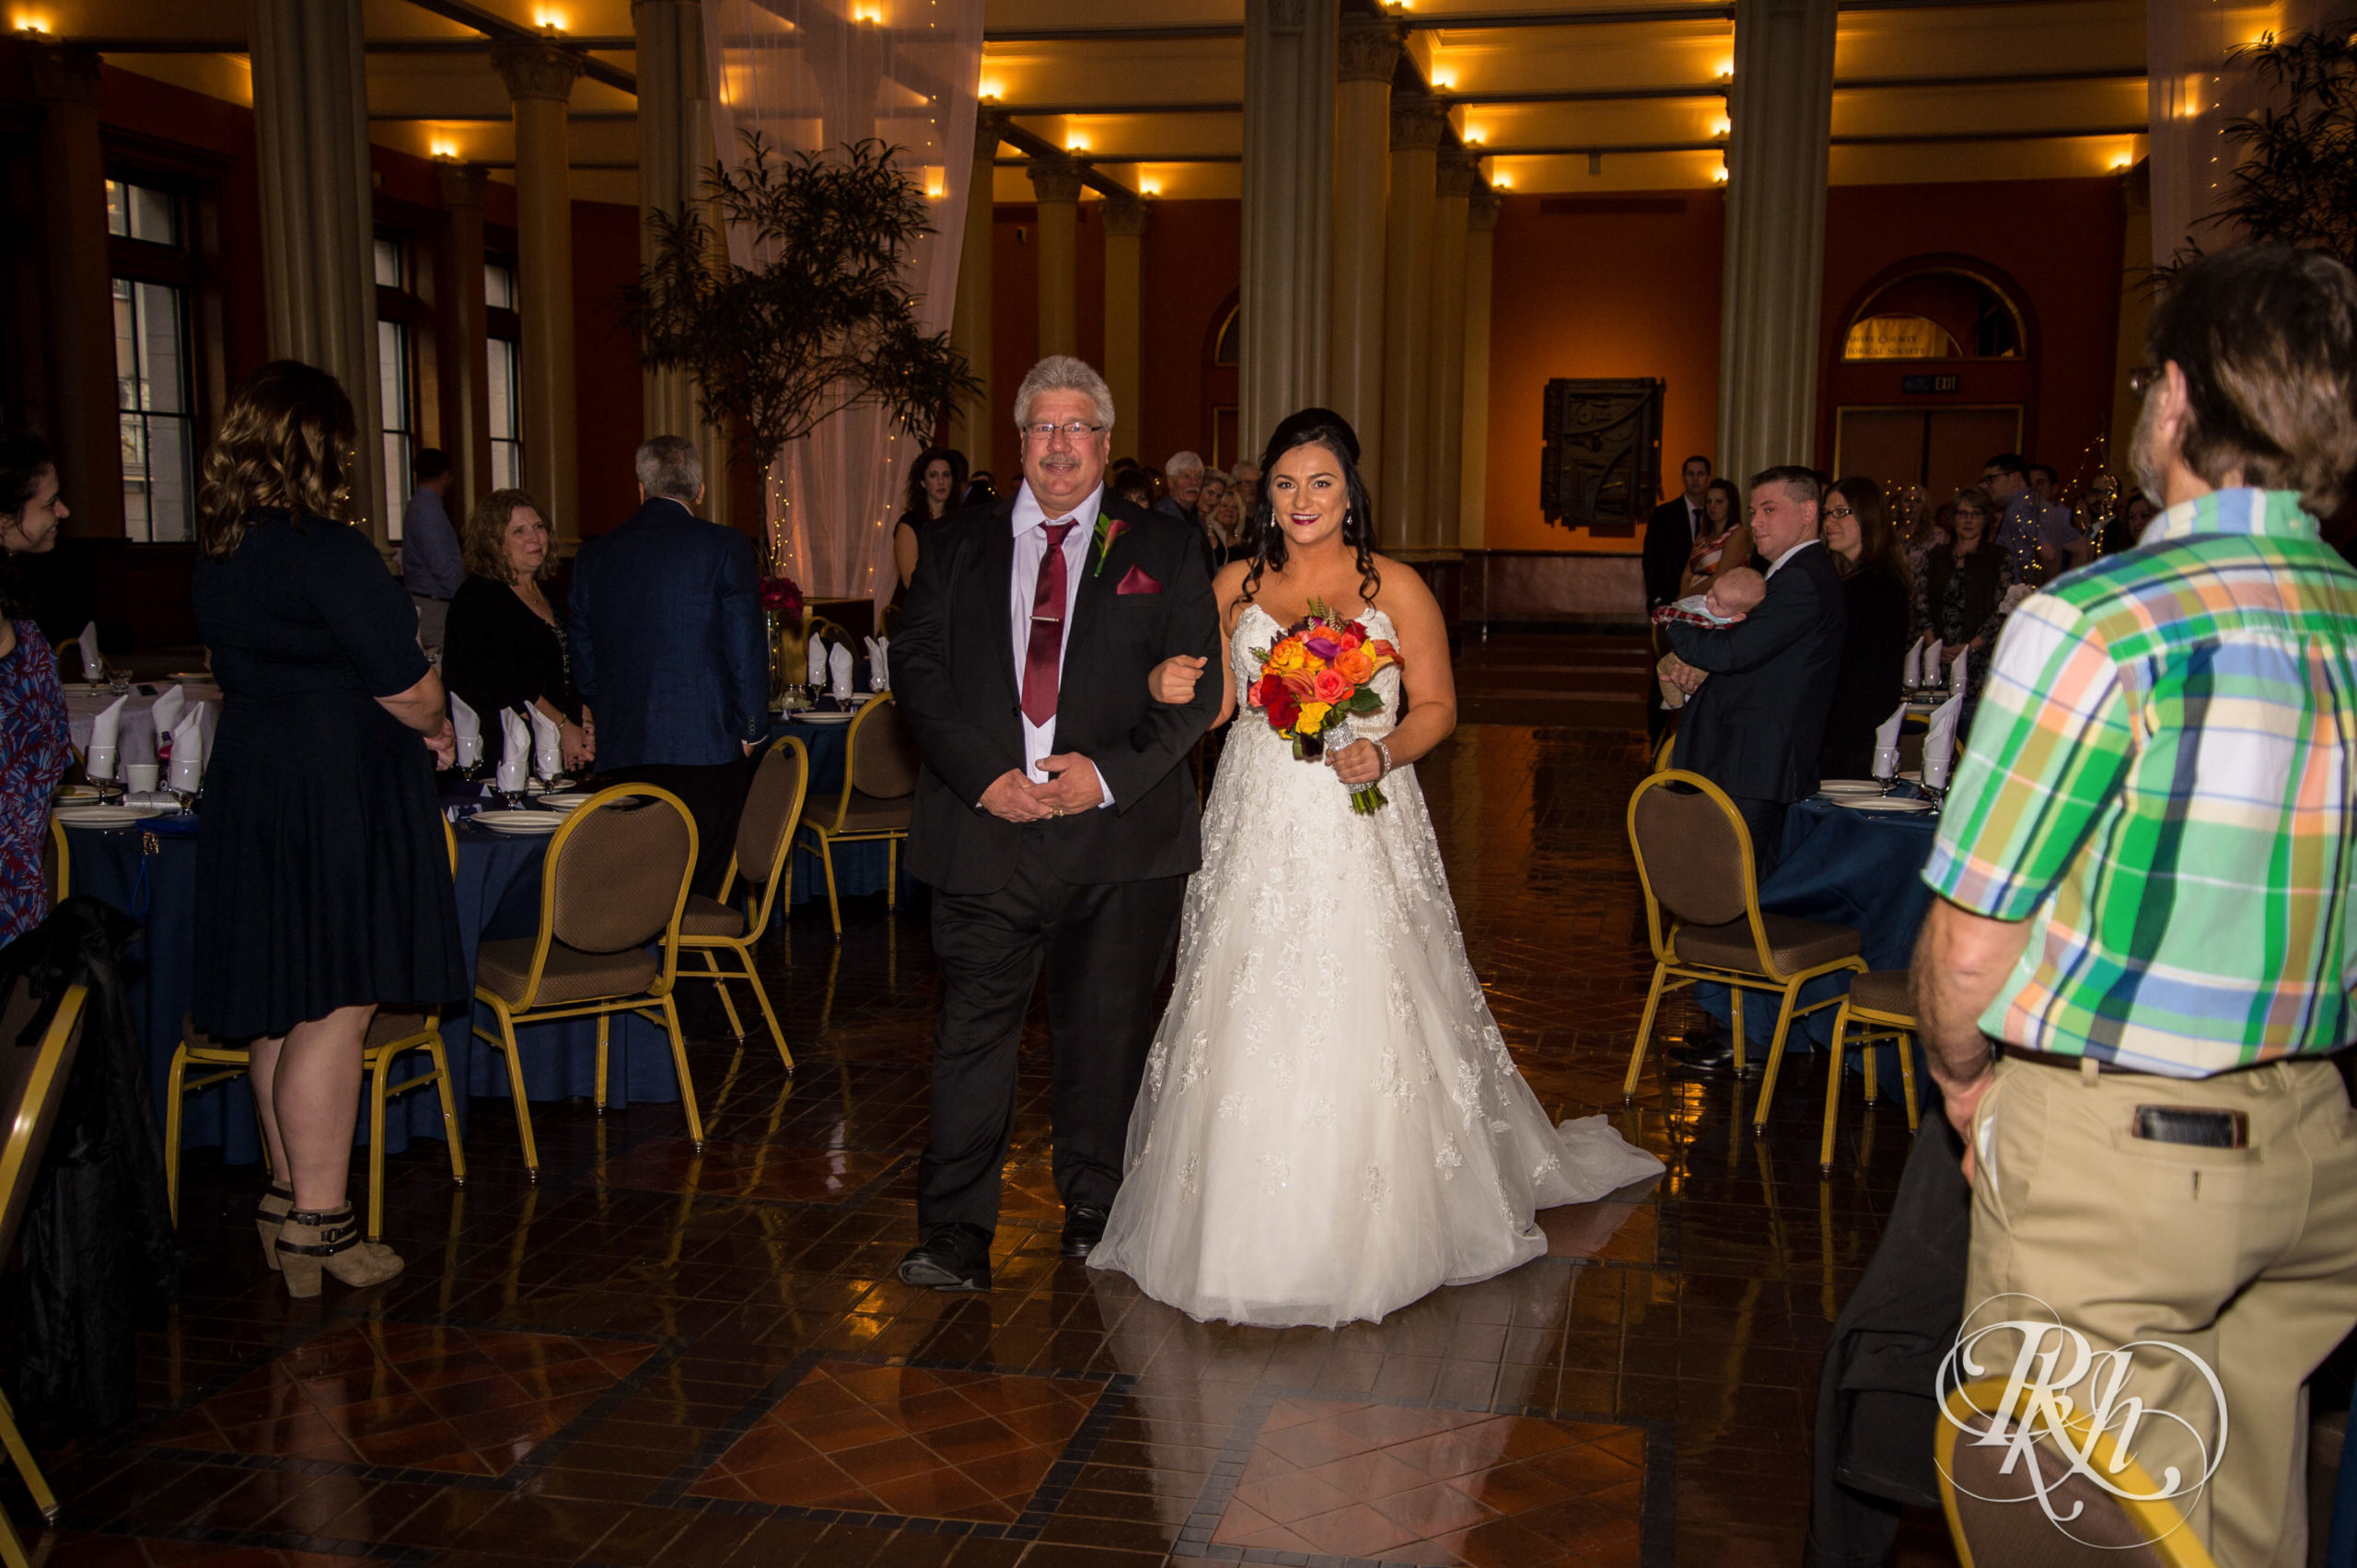 Bride and dad walk down the aisle during wedding ceremony at Landmark Center in Saint Paul, Minnesota.